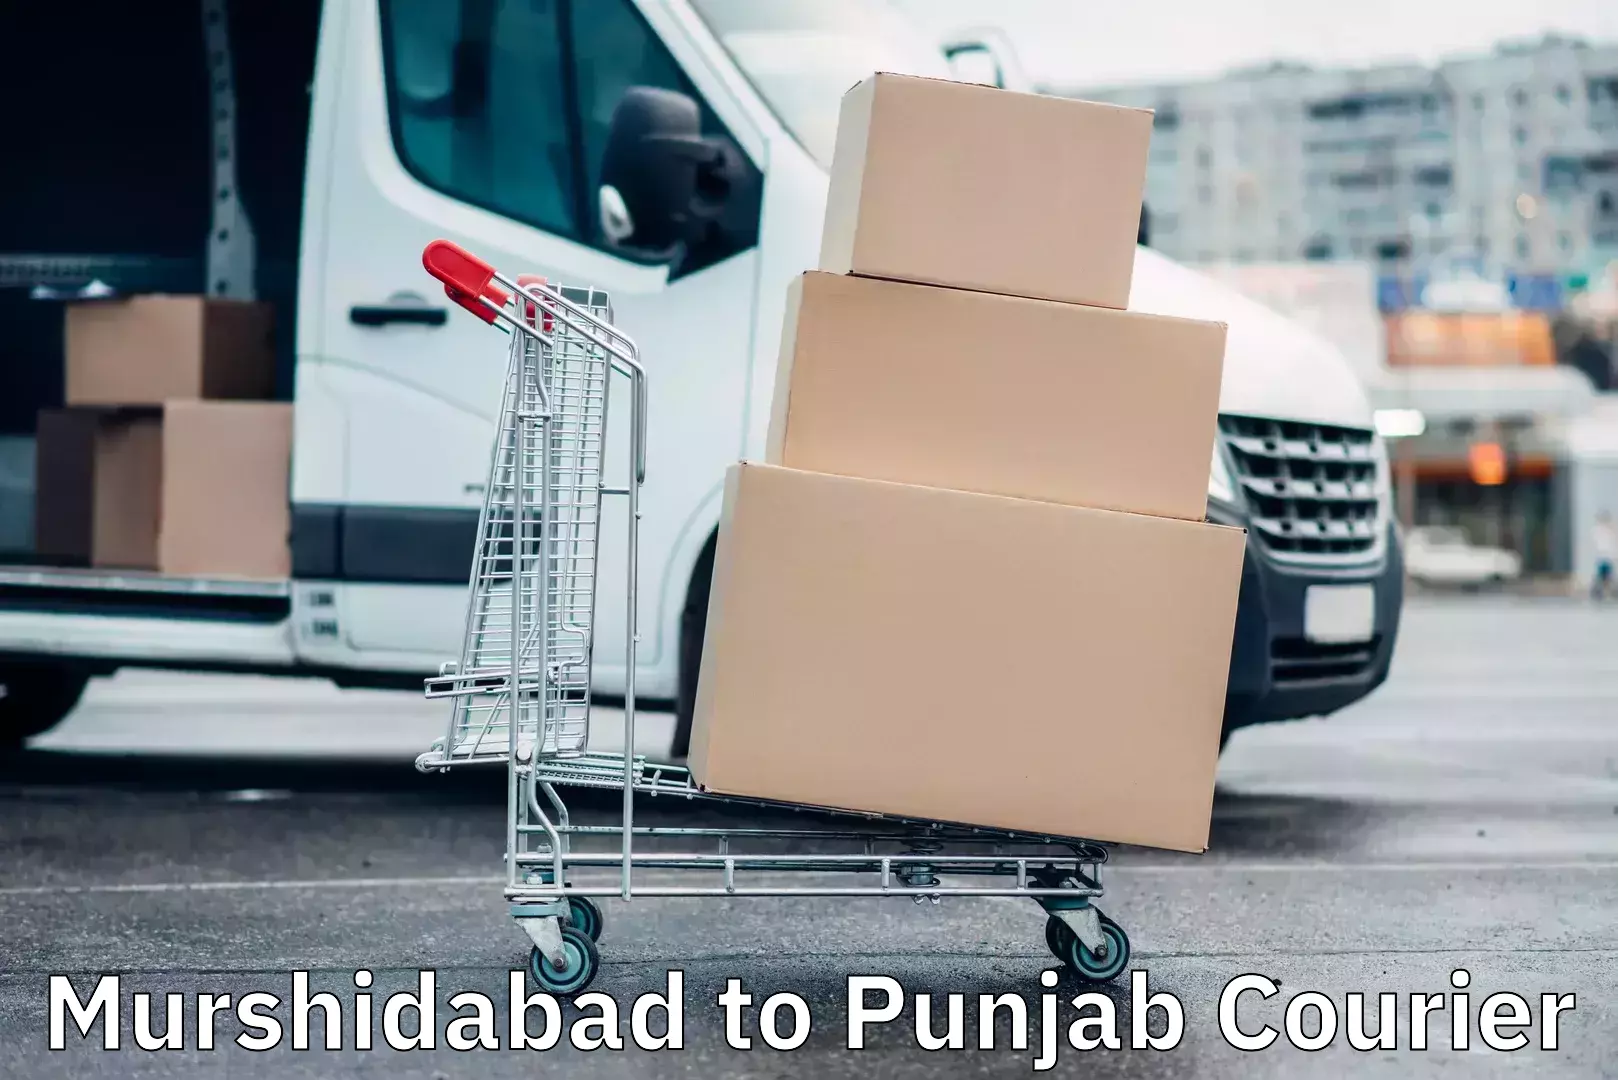 24/7 courier service in Murshidabad to Ajnala